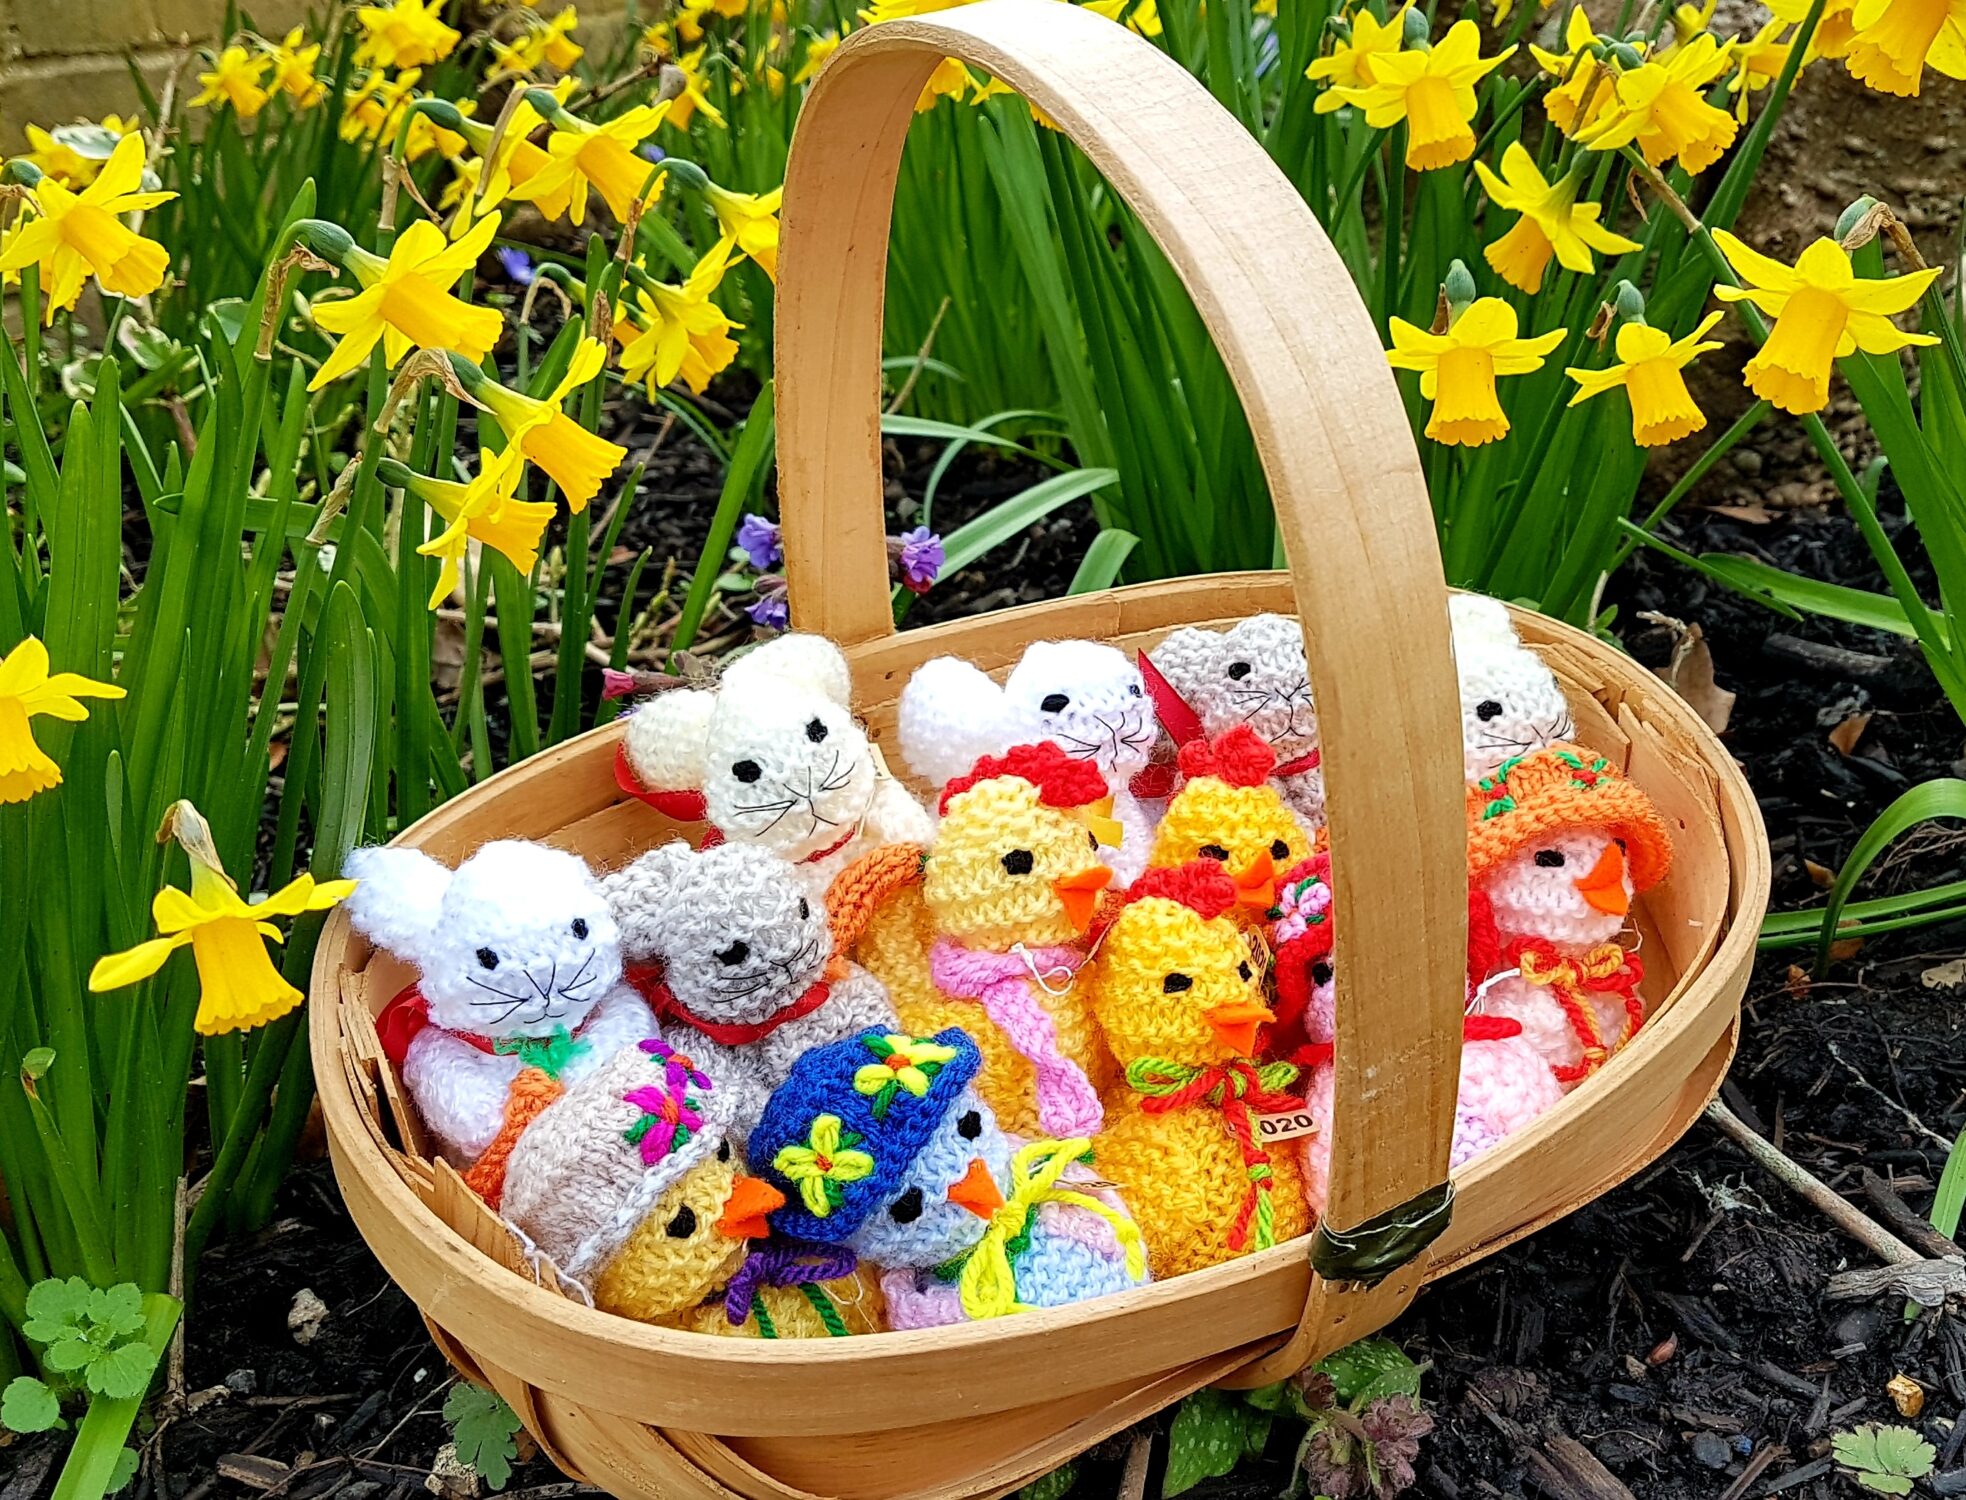 Knitted collection of animals in basket